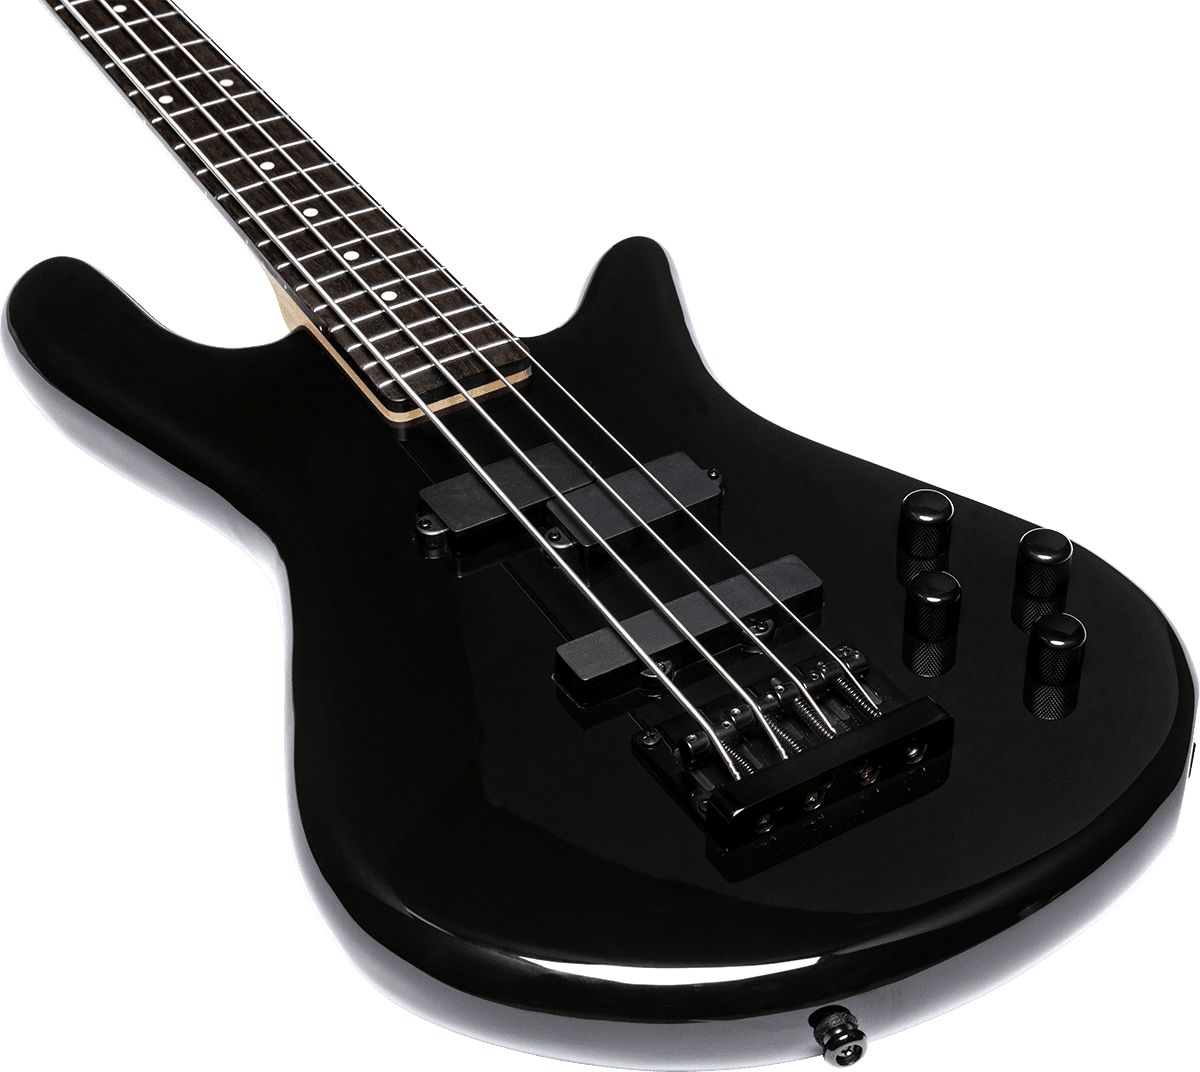 Spector Performer Serie 4 Eb - Black - Solid body electric bass - Variation 2